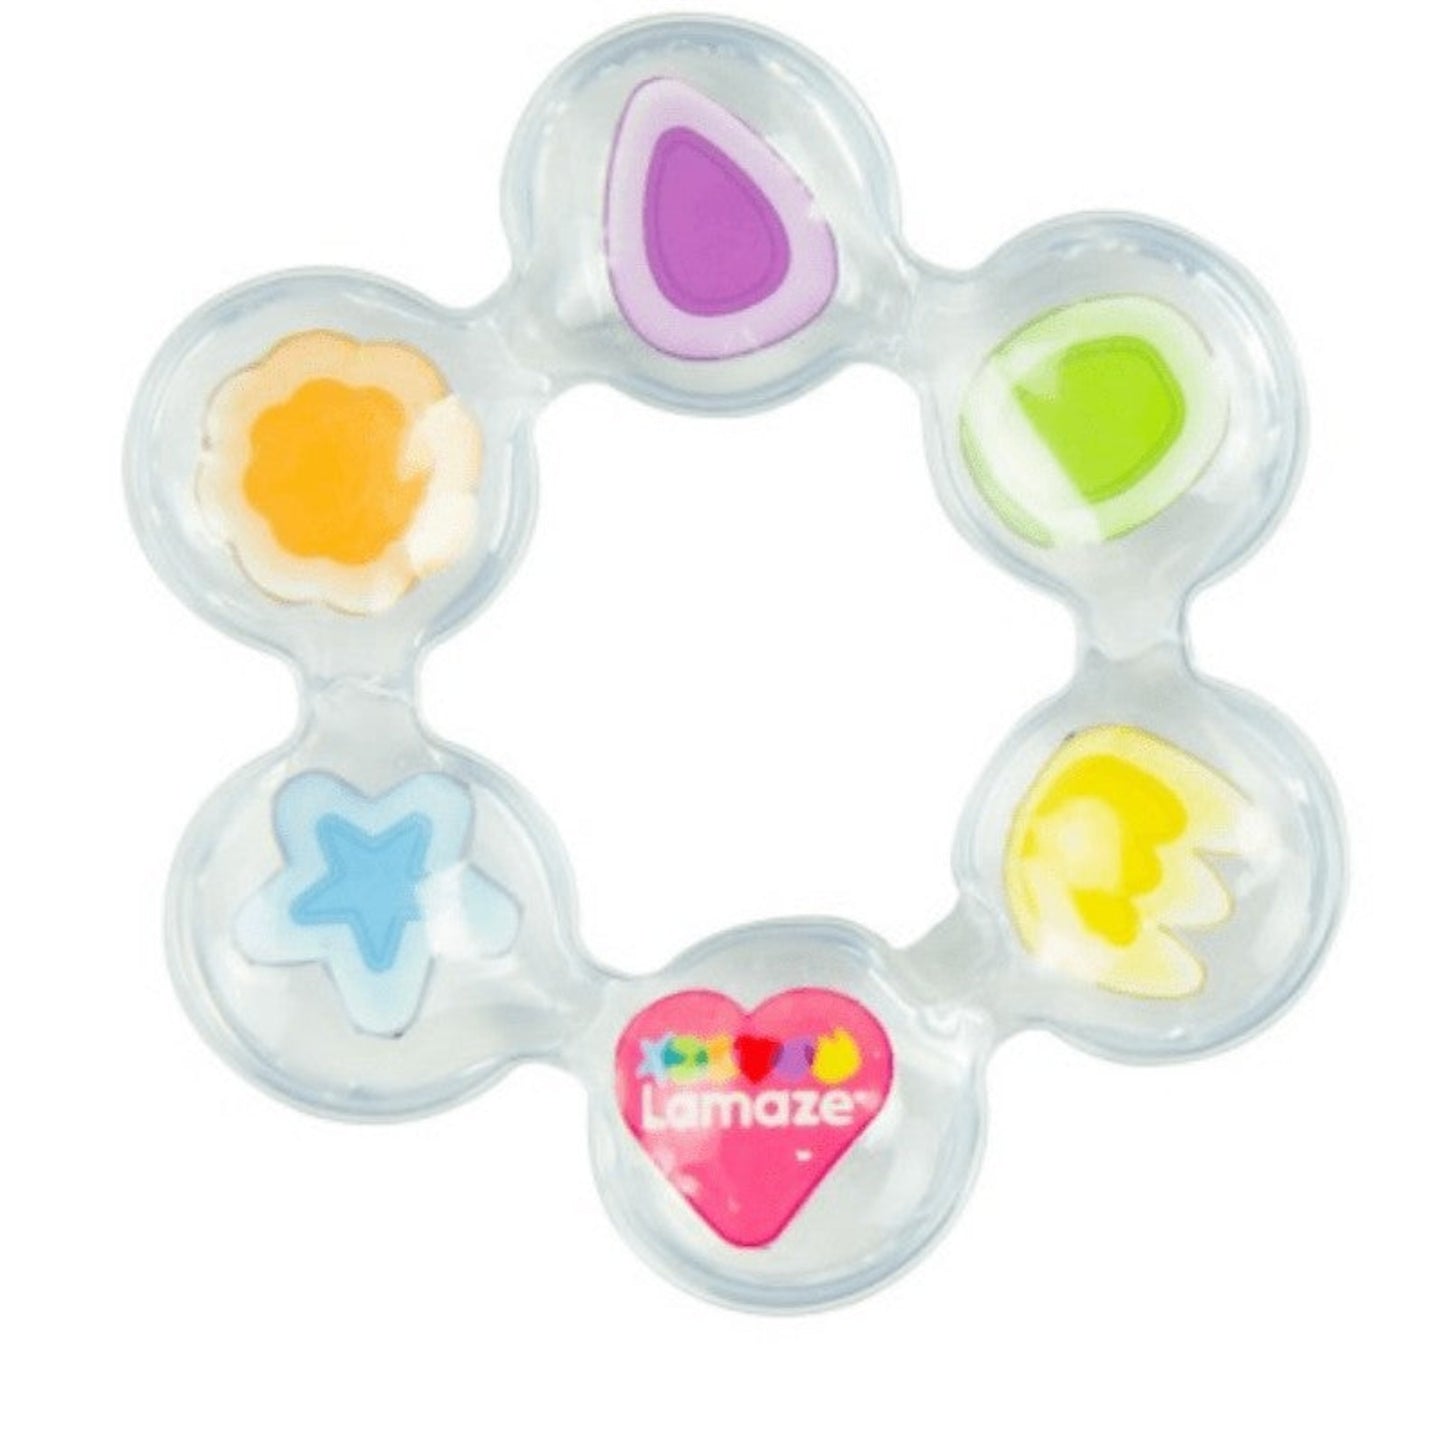 Teether Lamaze Chill Teether for baby Lamaze 8.99